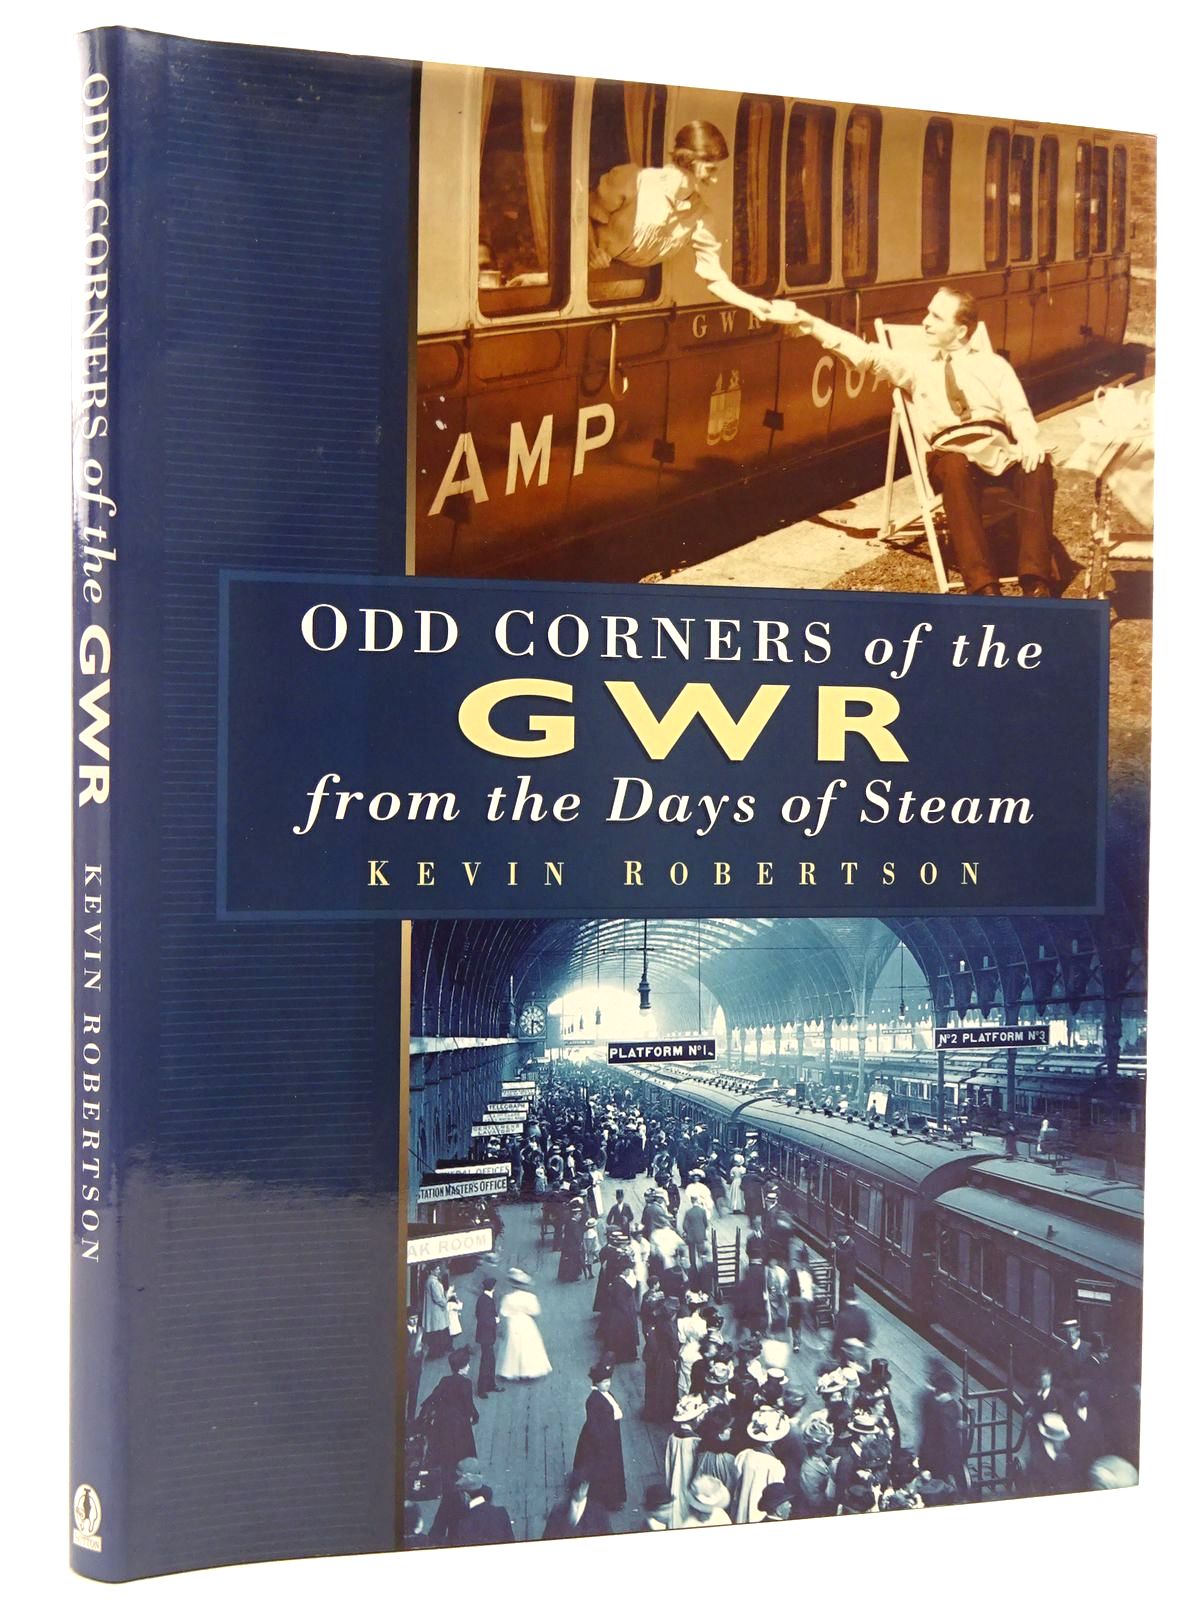 Photo of ODD CORNERS OF THE GWR FROM THE DAYS OF STEAM written by Robertson, Kevin published by Sutton Publishing (STOCK CODE: 2128809)  for sale by Stella & Rose's Books